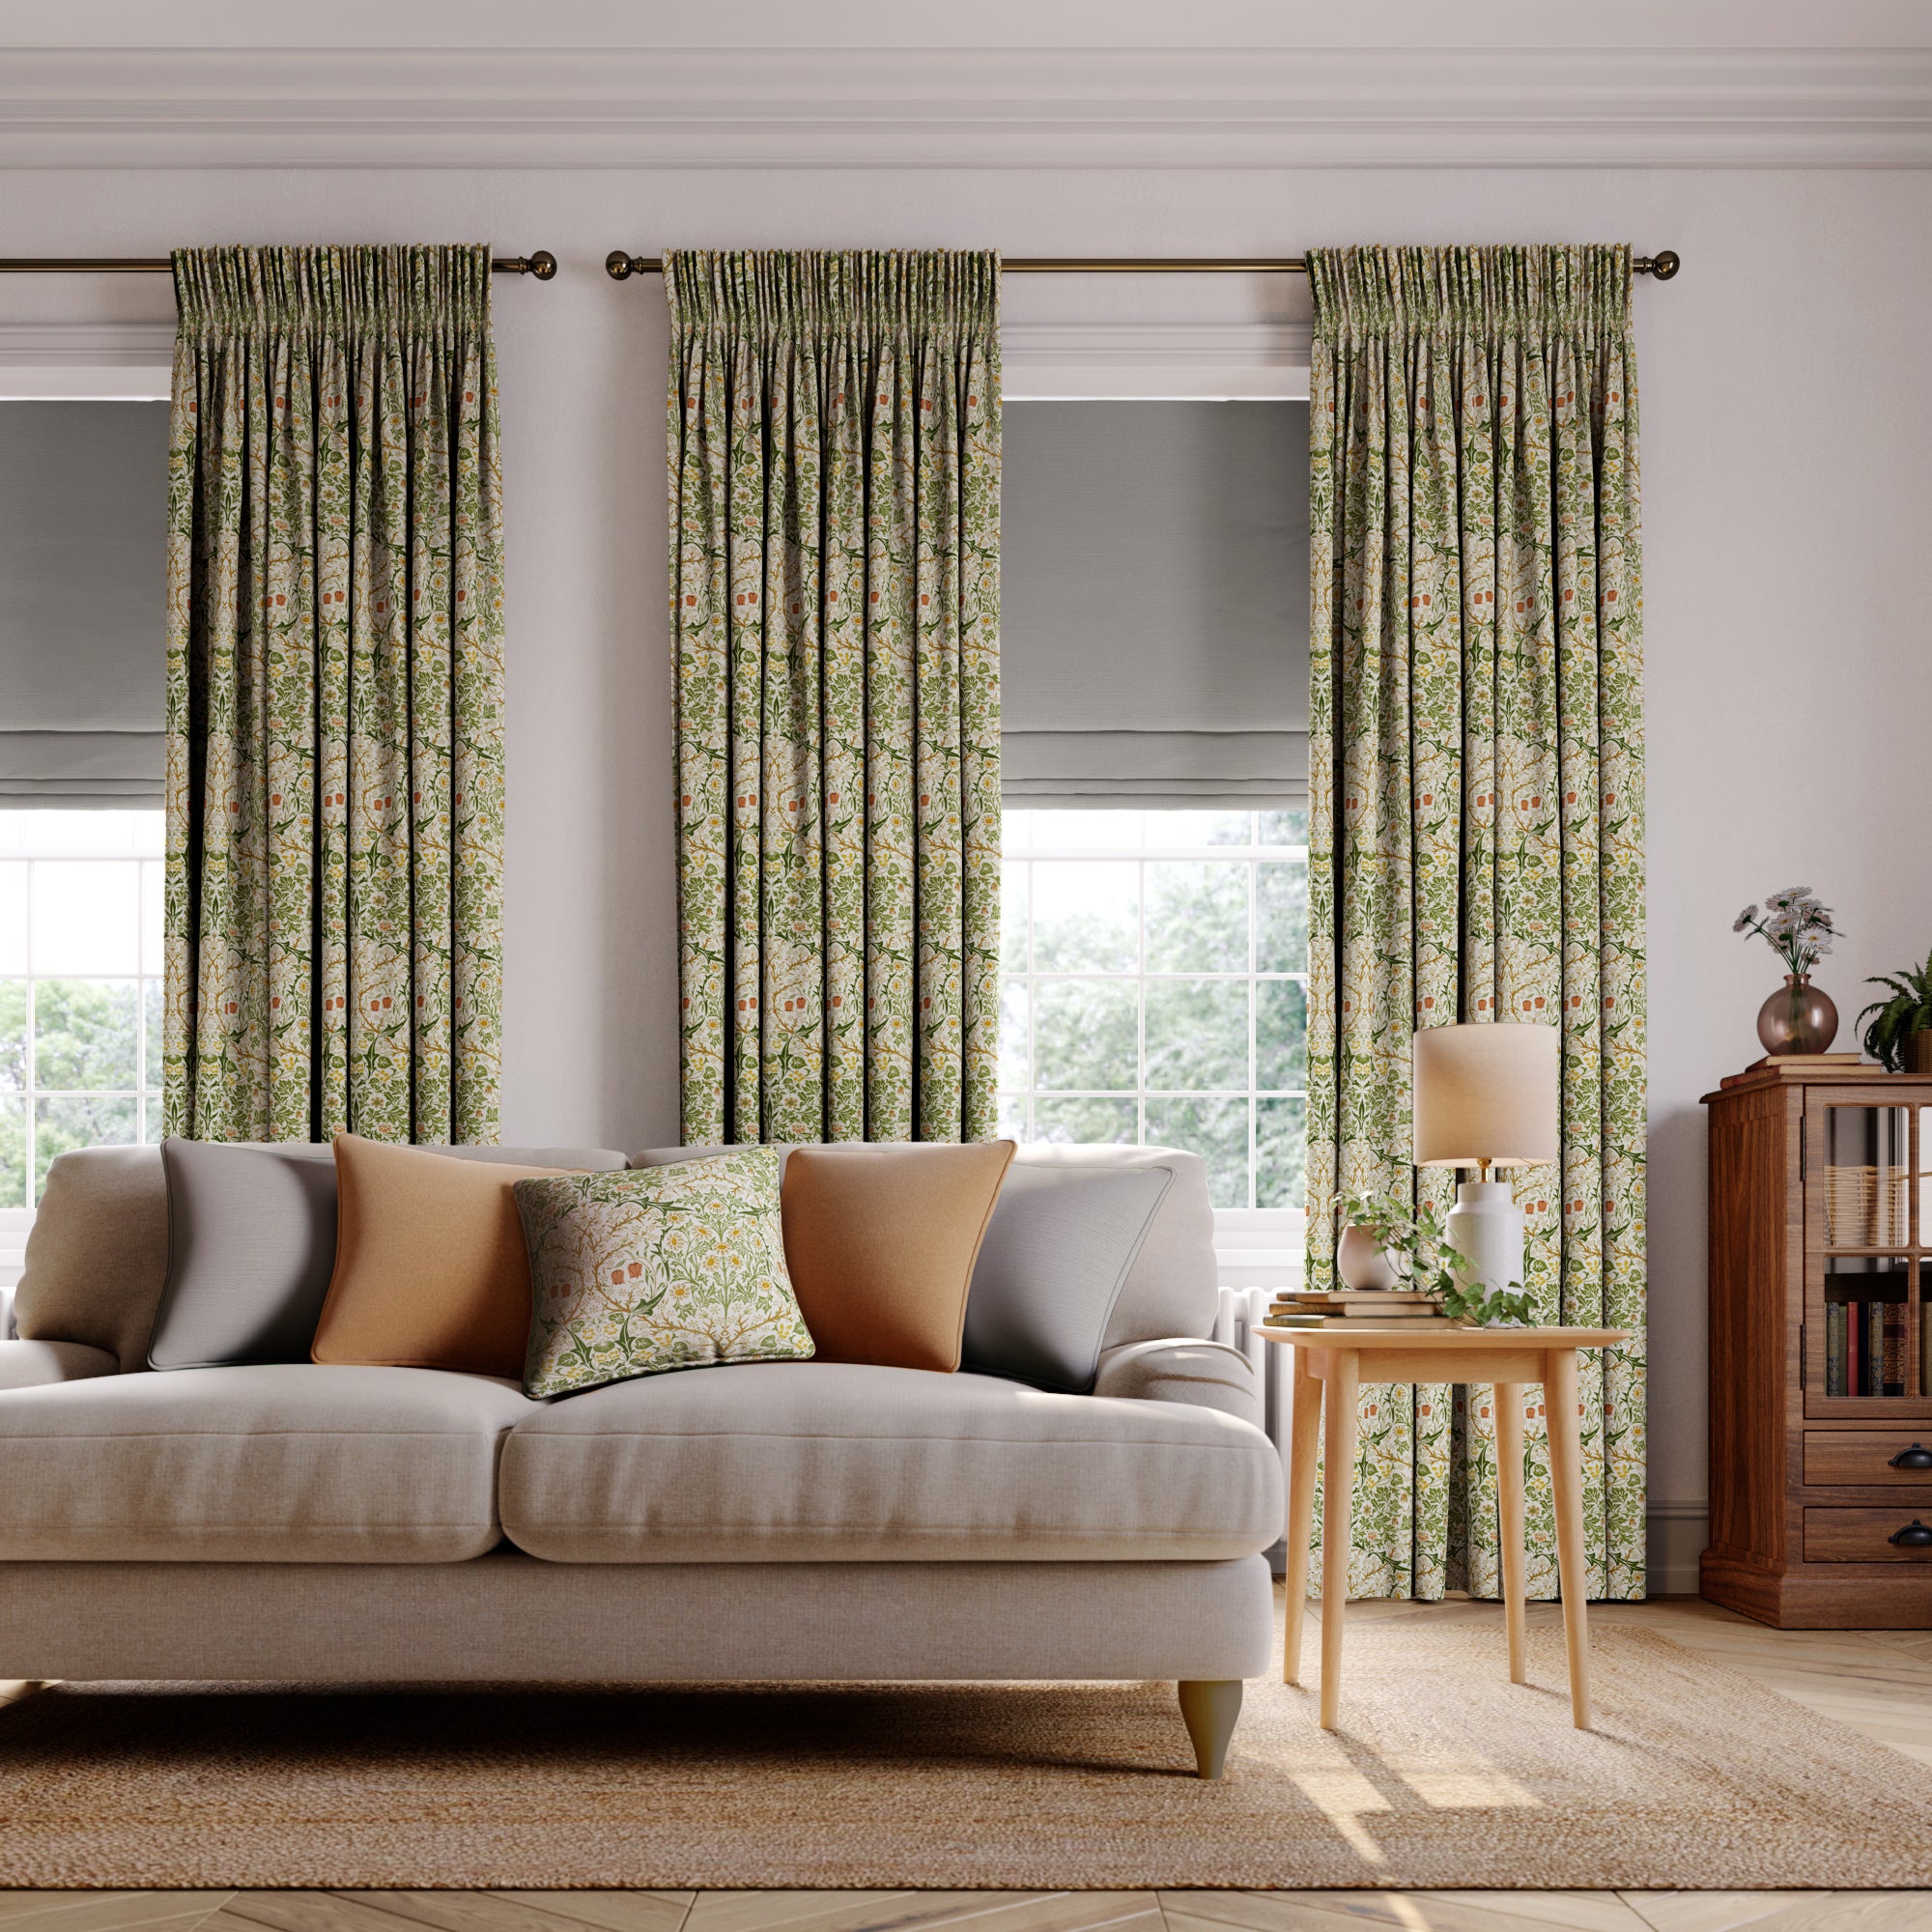 William Morris At Home Blackthorn Made to Measure Curtains Blackthorn Aloe